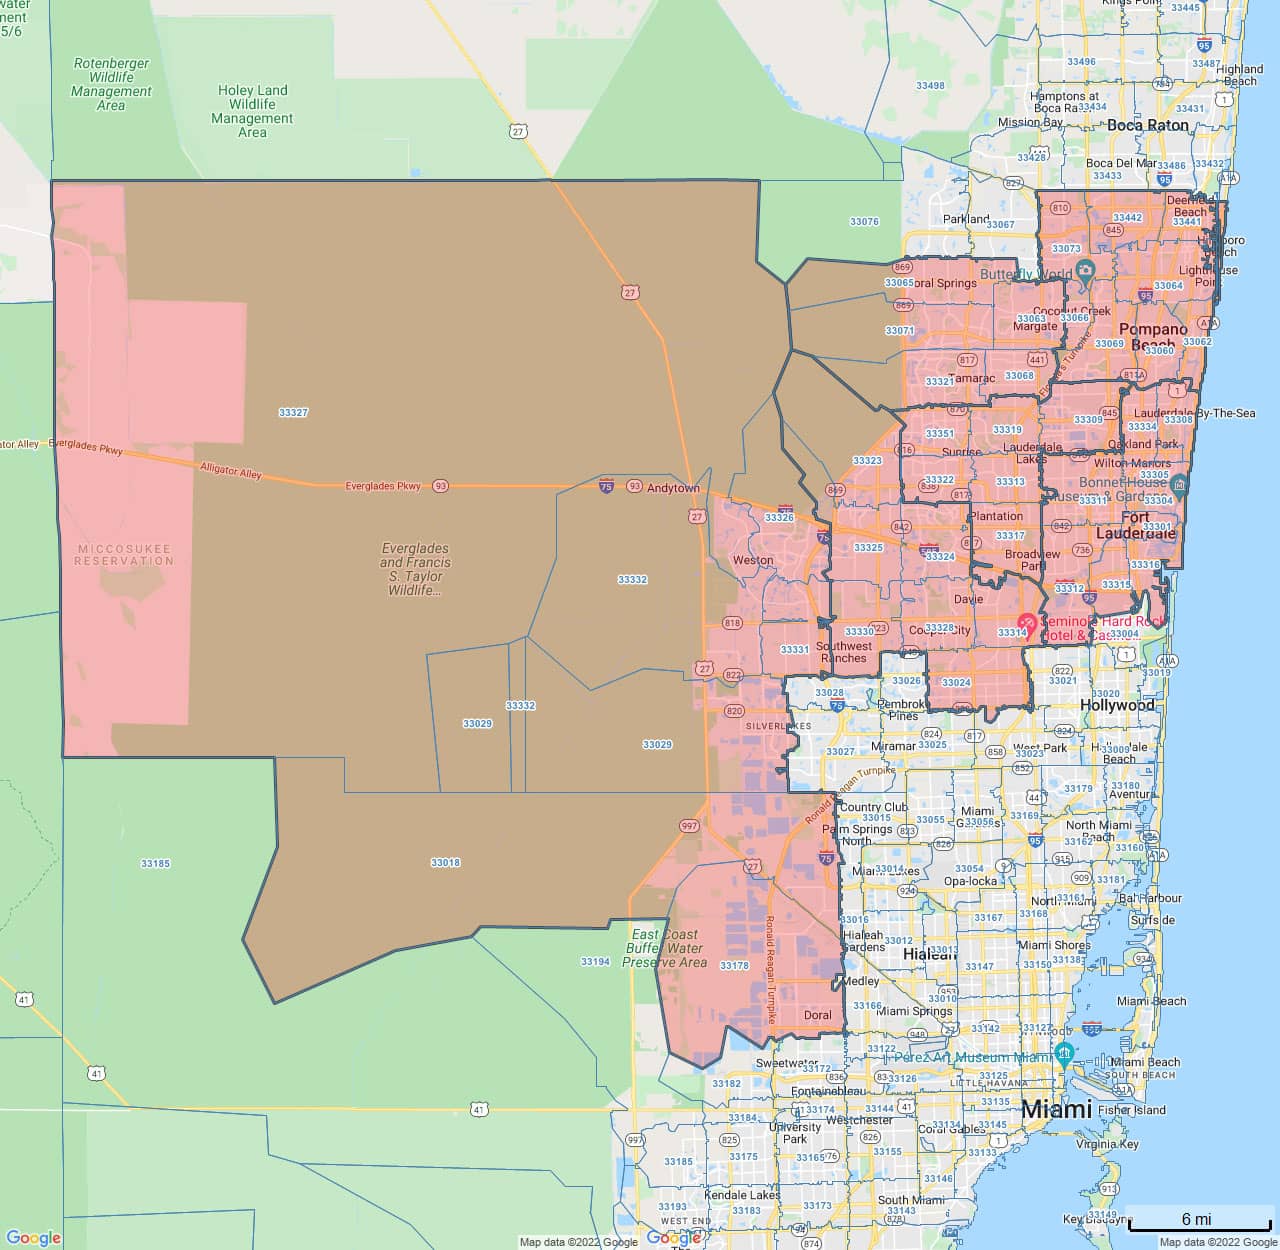 All Dry Services Area Coverage Map for Broward County & Doral, FL